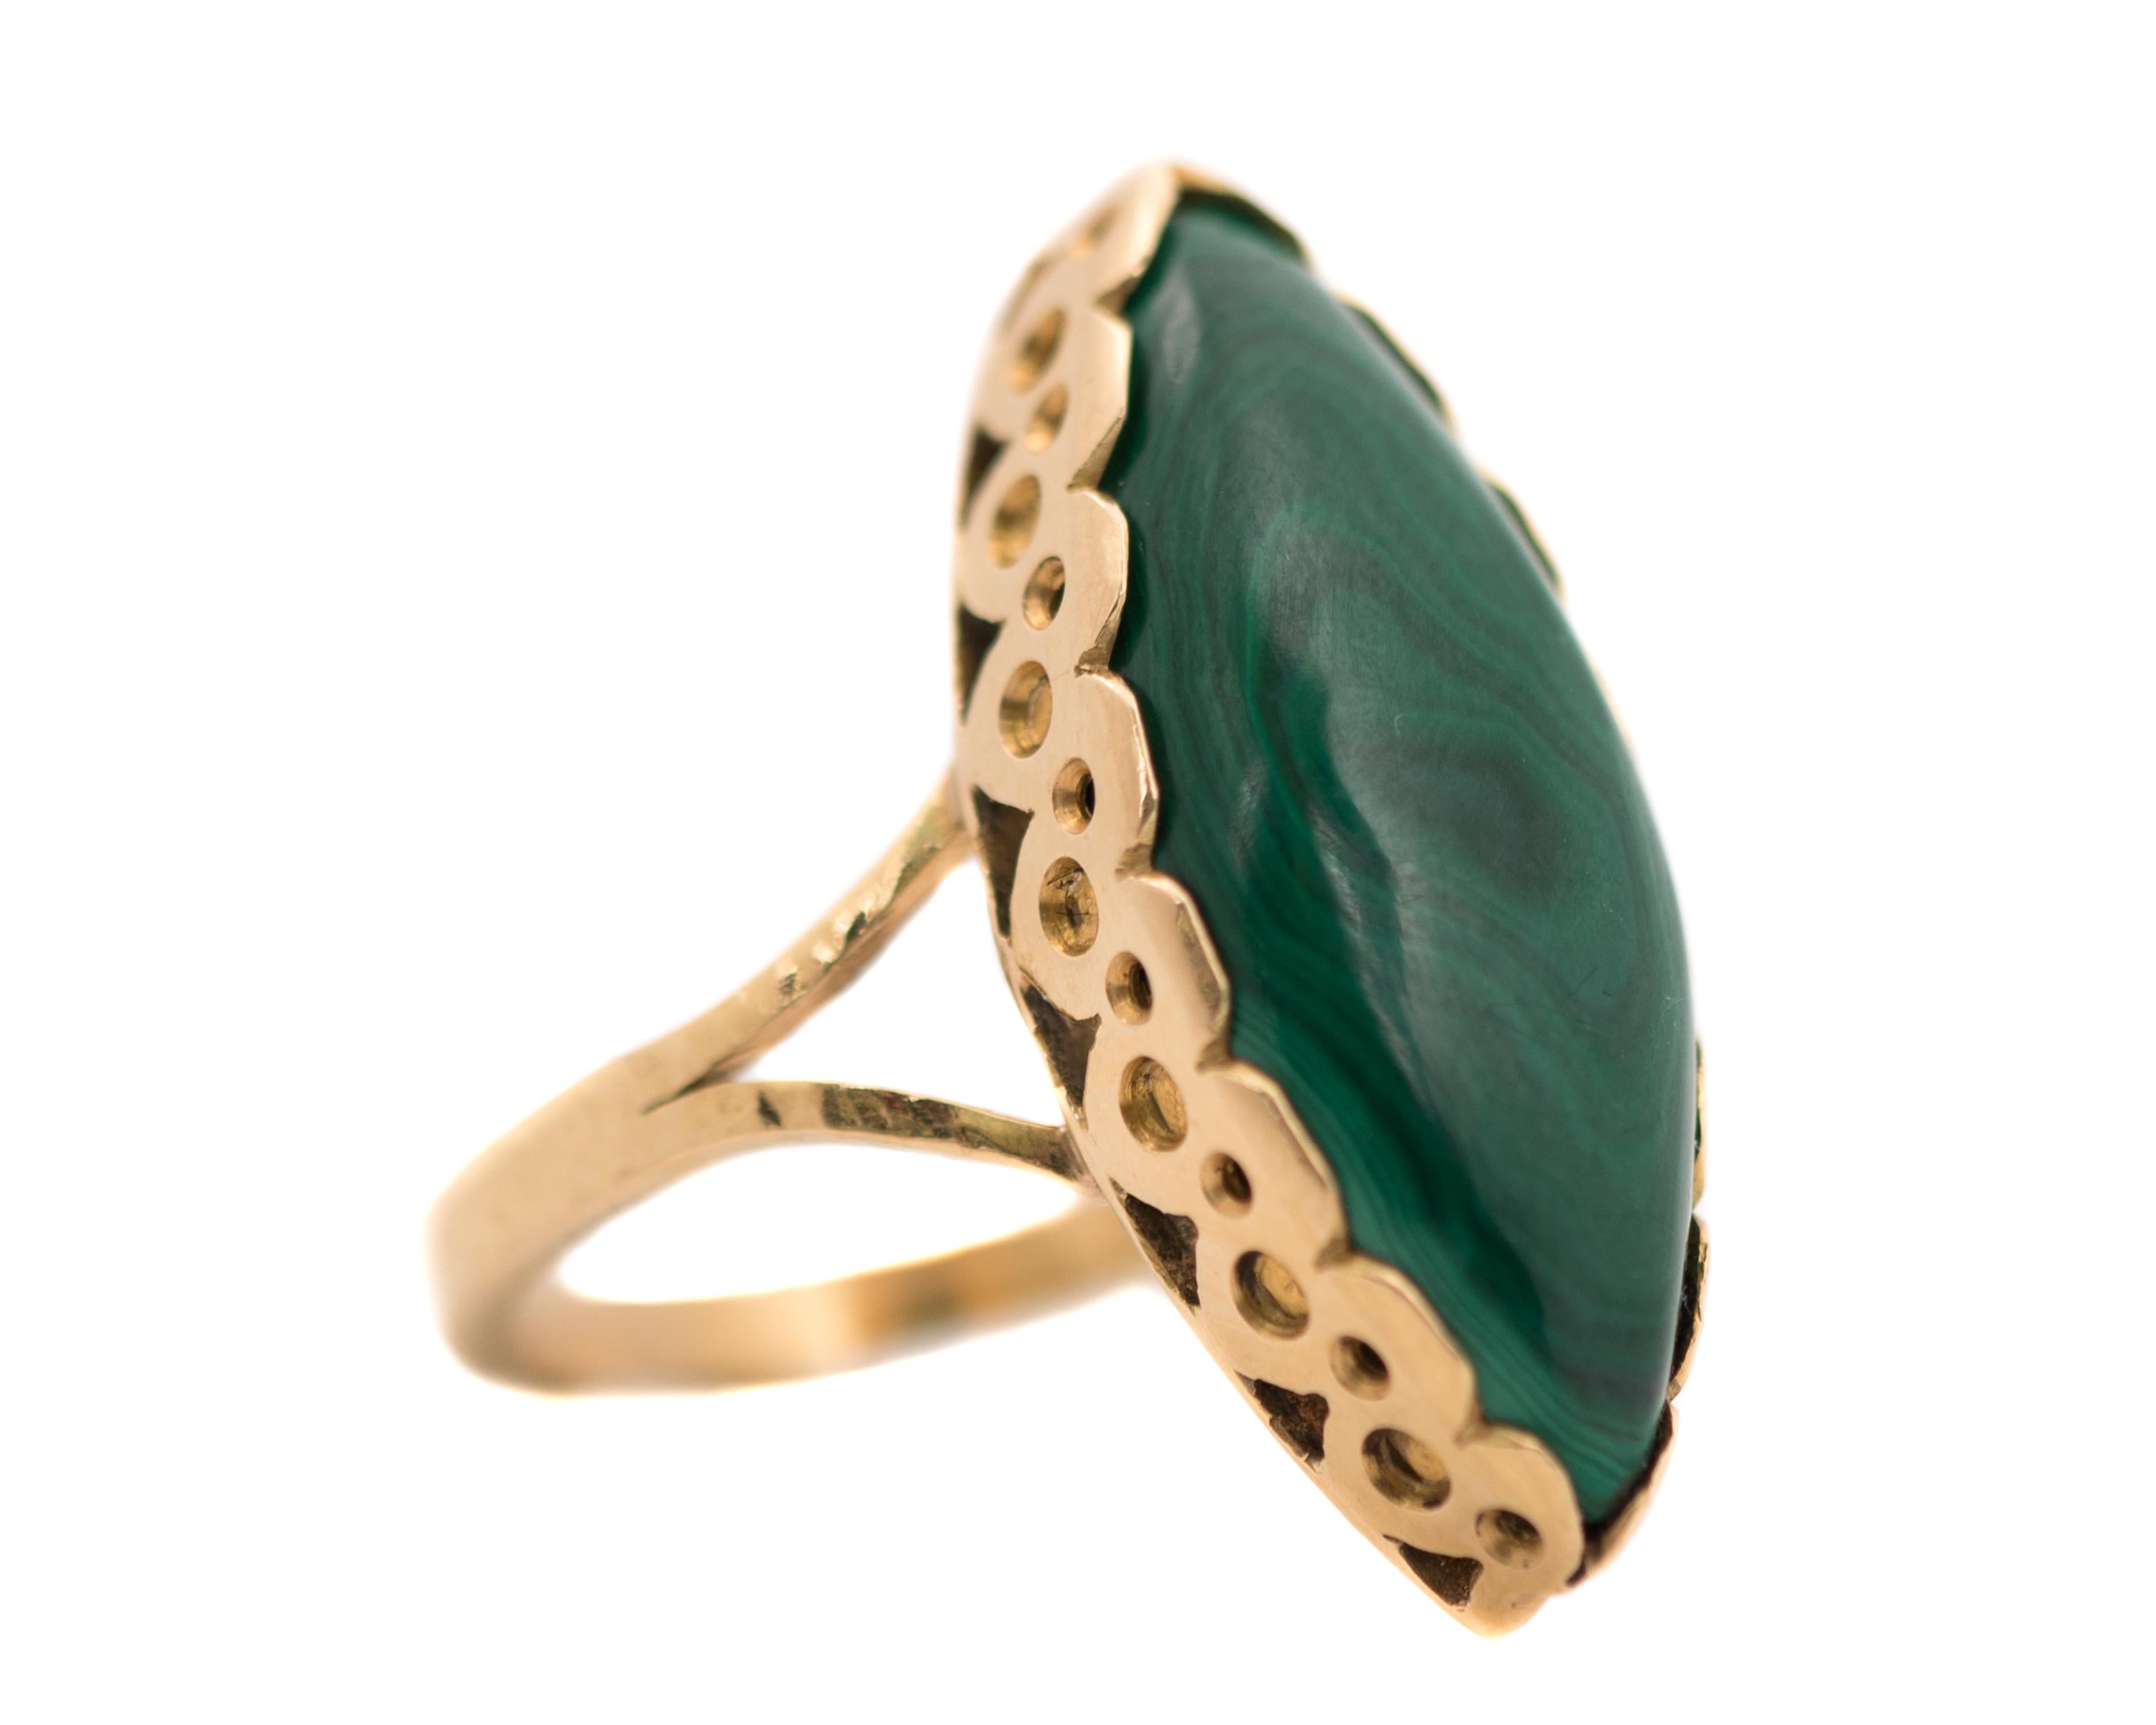 1980s Malachite Ring - 18 Karat Yellow Gold, Malachite

Features:
Marquise cut 3.0 carat Malachite center stone
French Bezel setting
18 Karat Yellow Gold setting
Split Shoulders
Open Gallery and Back

2.5 millimeter wide shank
Ring face measures 29